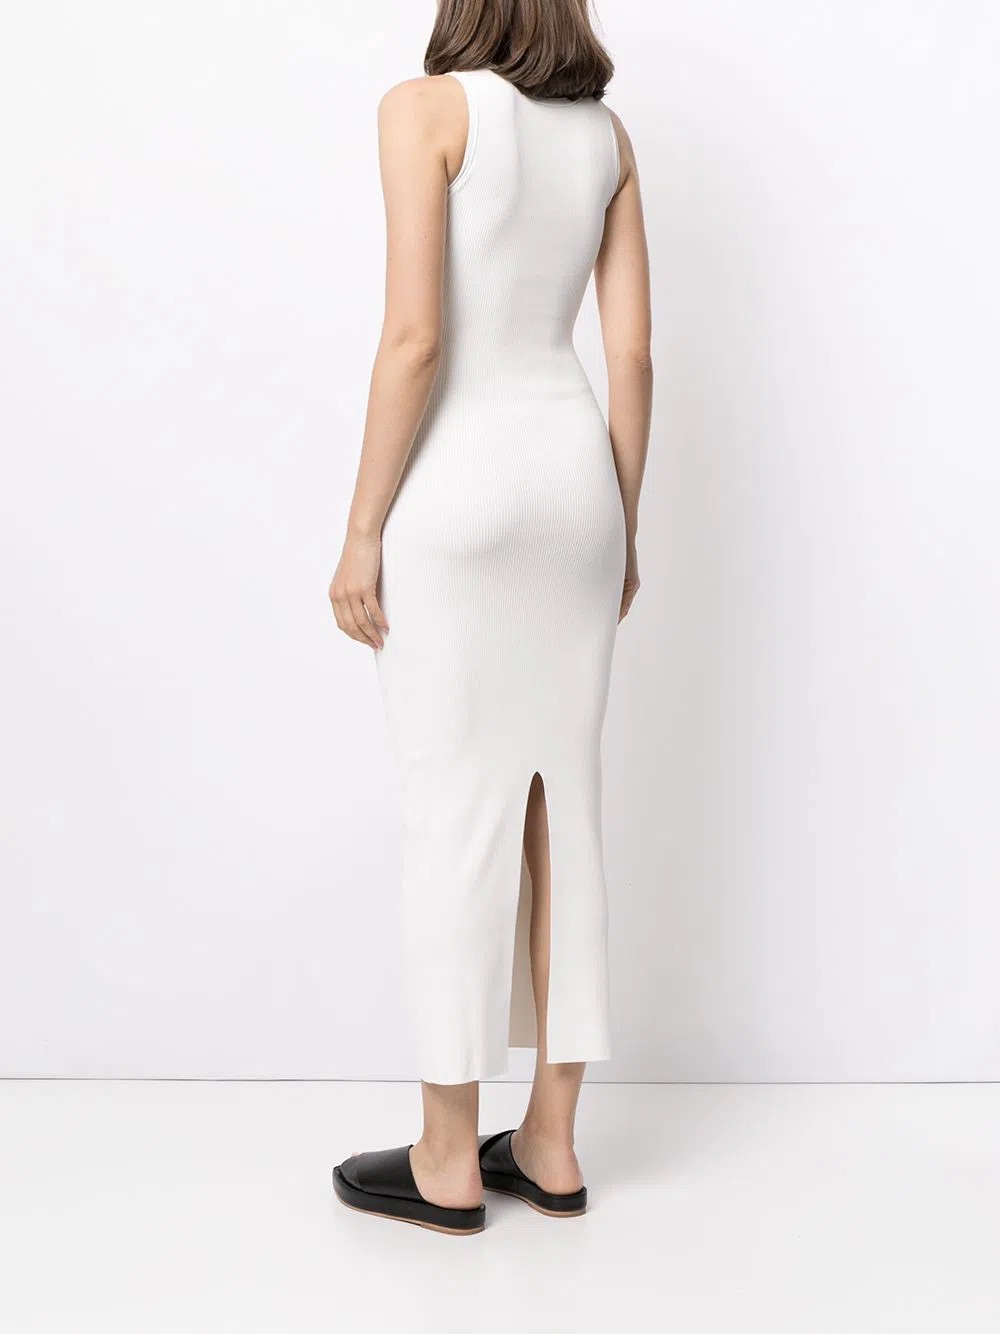 Sir The Label Ingrid Cut Out Midi Dress in ivory/white. Mid length with centre cut out. Dress hire in size 1.